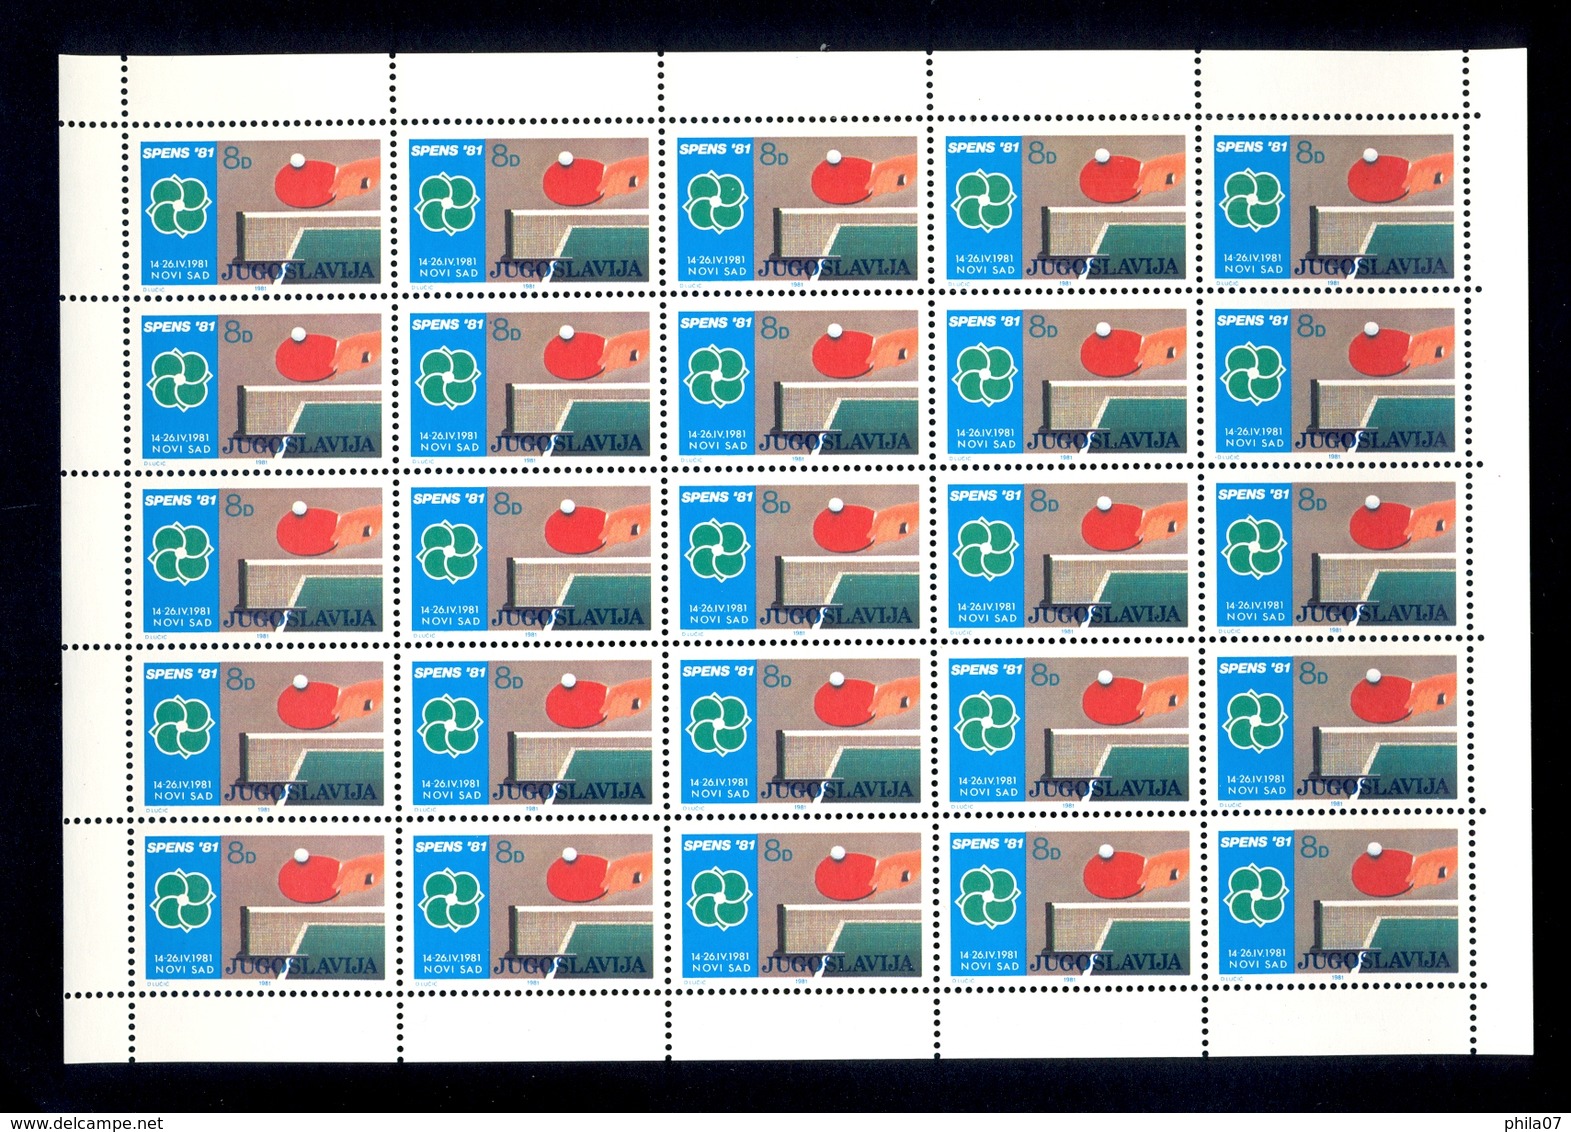 YUGOSLAVIA 1981 - Mi.No. 1882 - SPENS '81, TABLE TENNIS, Complete Sheet In MNH Condition. - Table Tennis